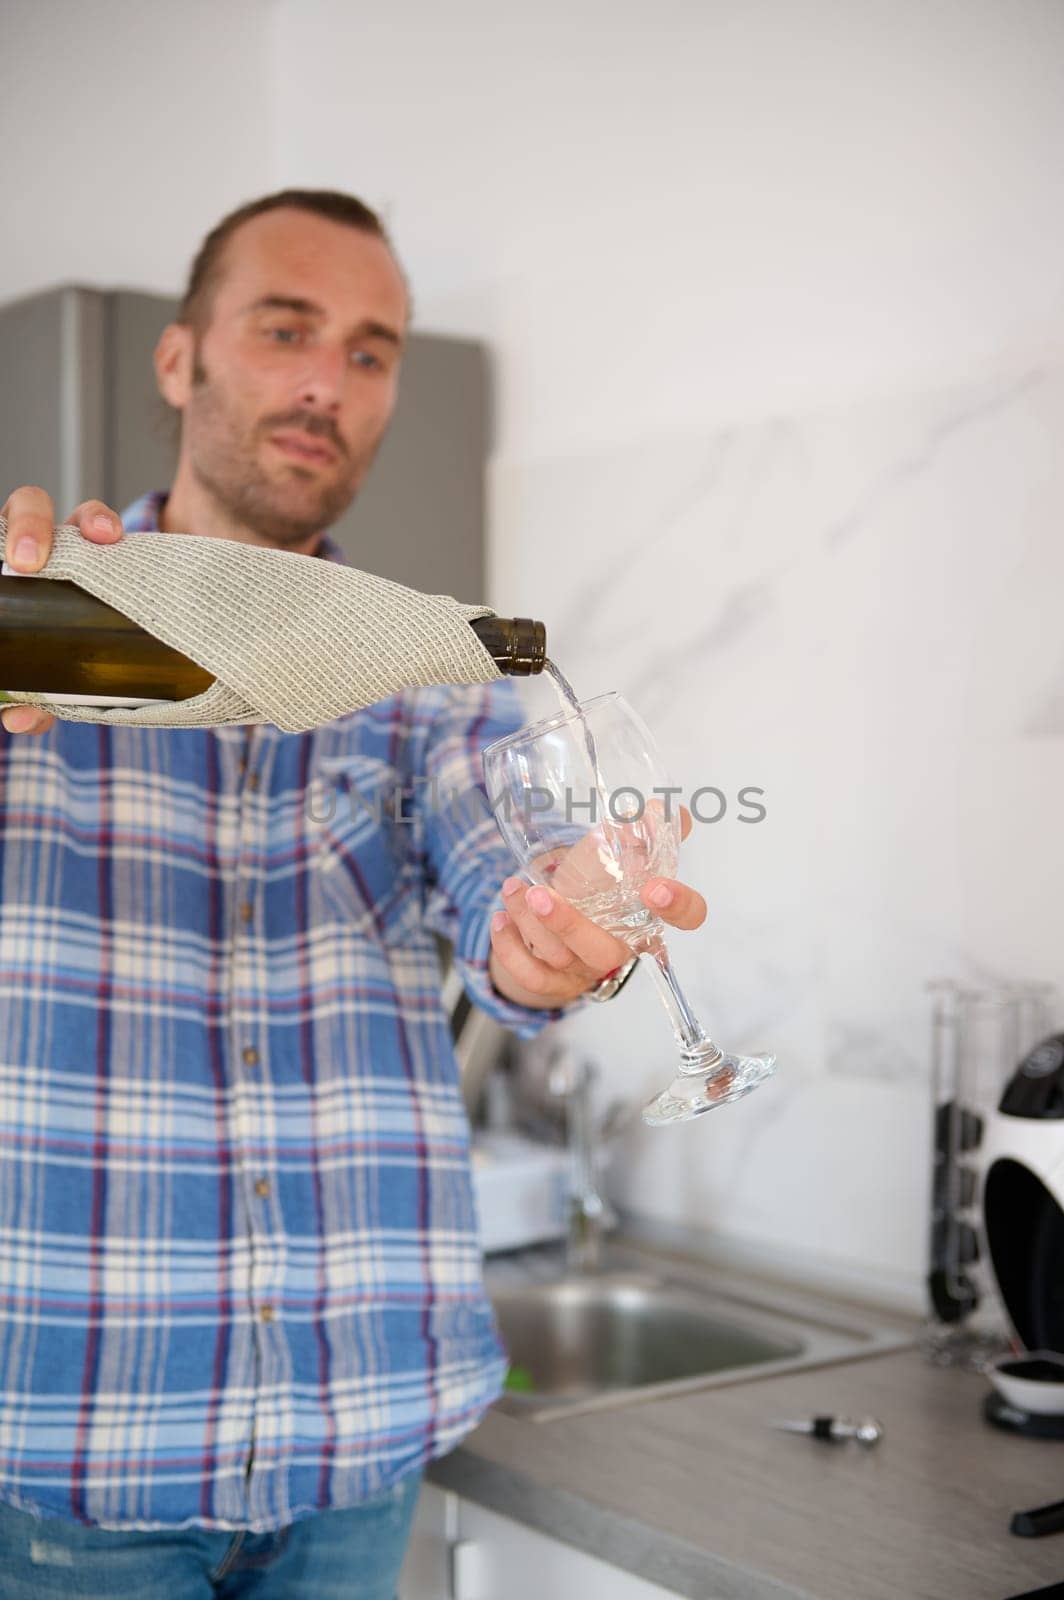 Details on the hands holding bottle of white wine and pouring it into a wine glass, standing in the home kitchen interior by artgf